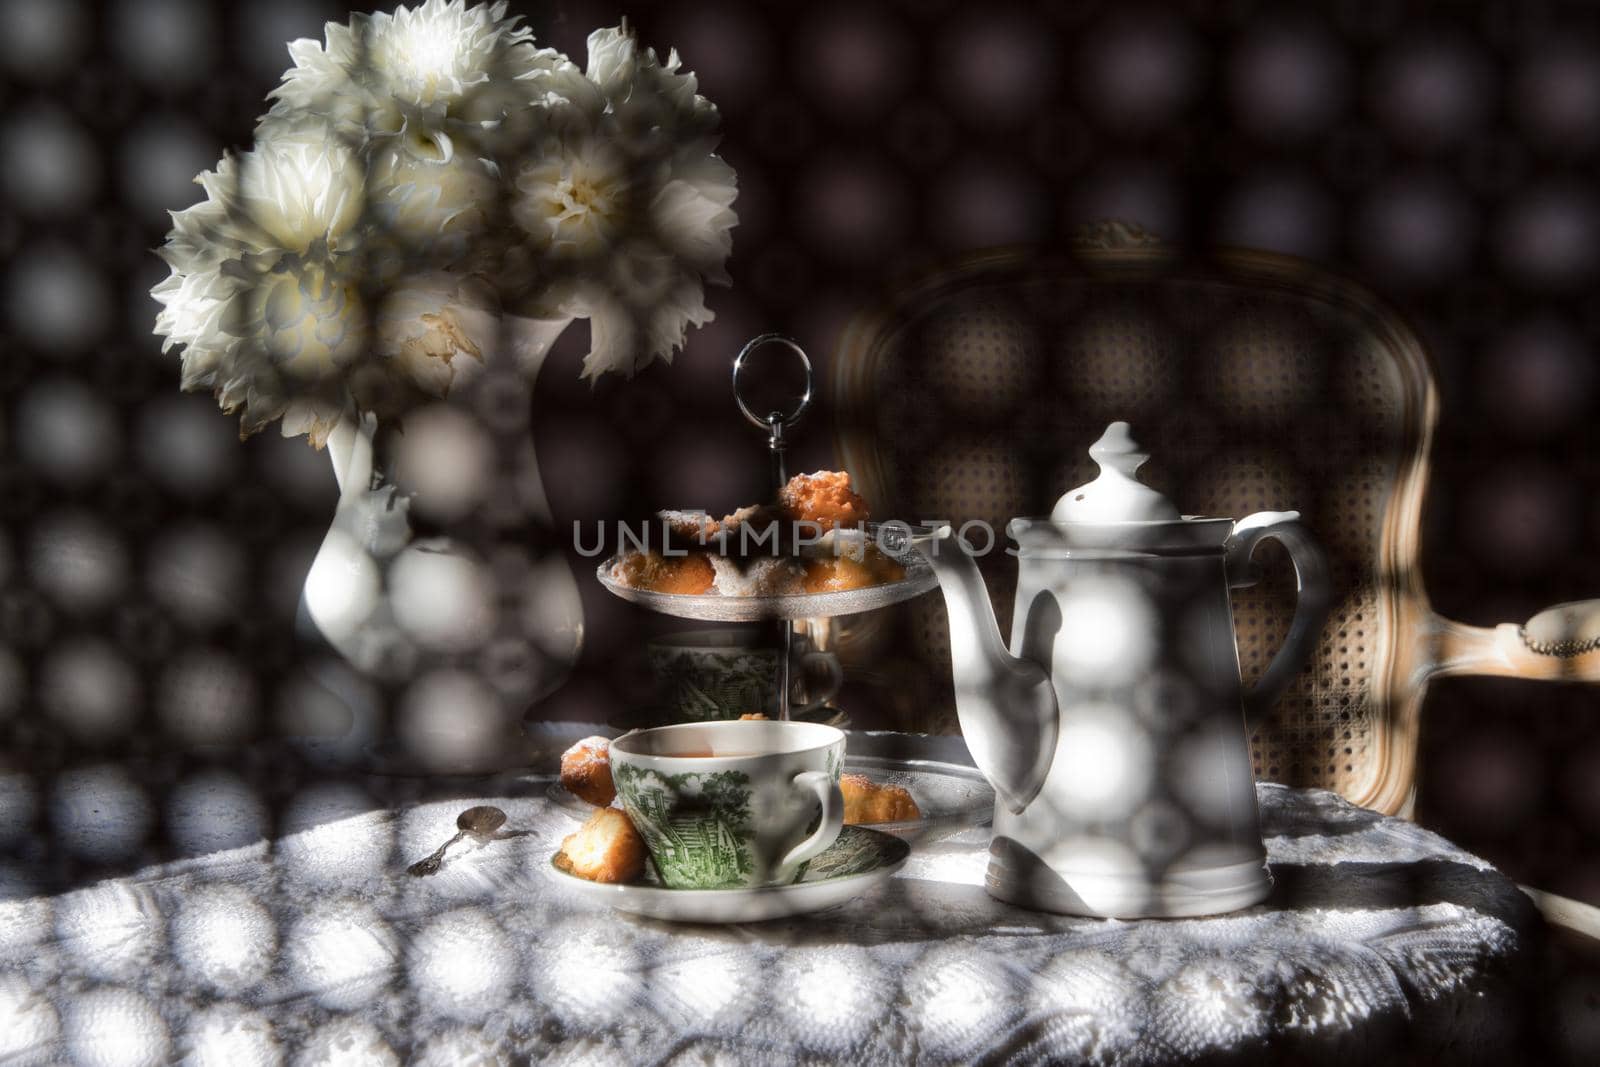 abstract photography over the back of a chair in blur, English style tea break, still life with flowers and donuts in the morning sun, homemade cakes. High quality photo